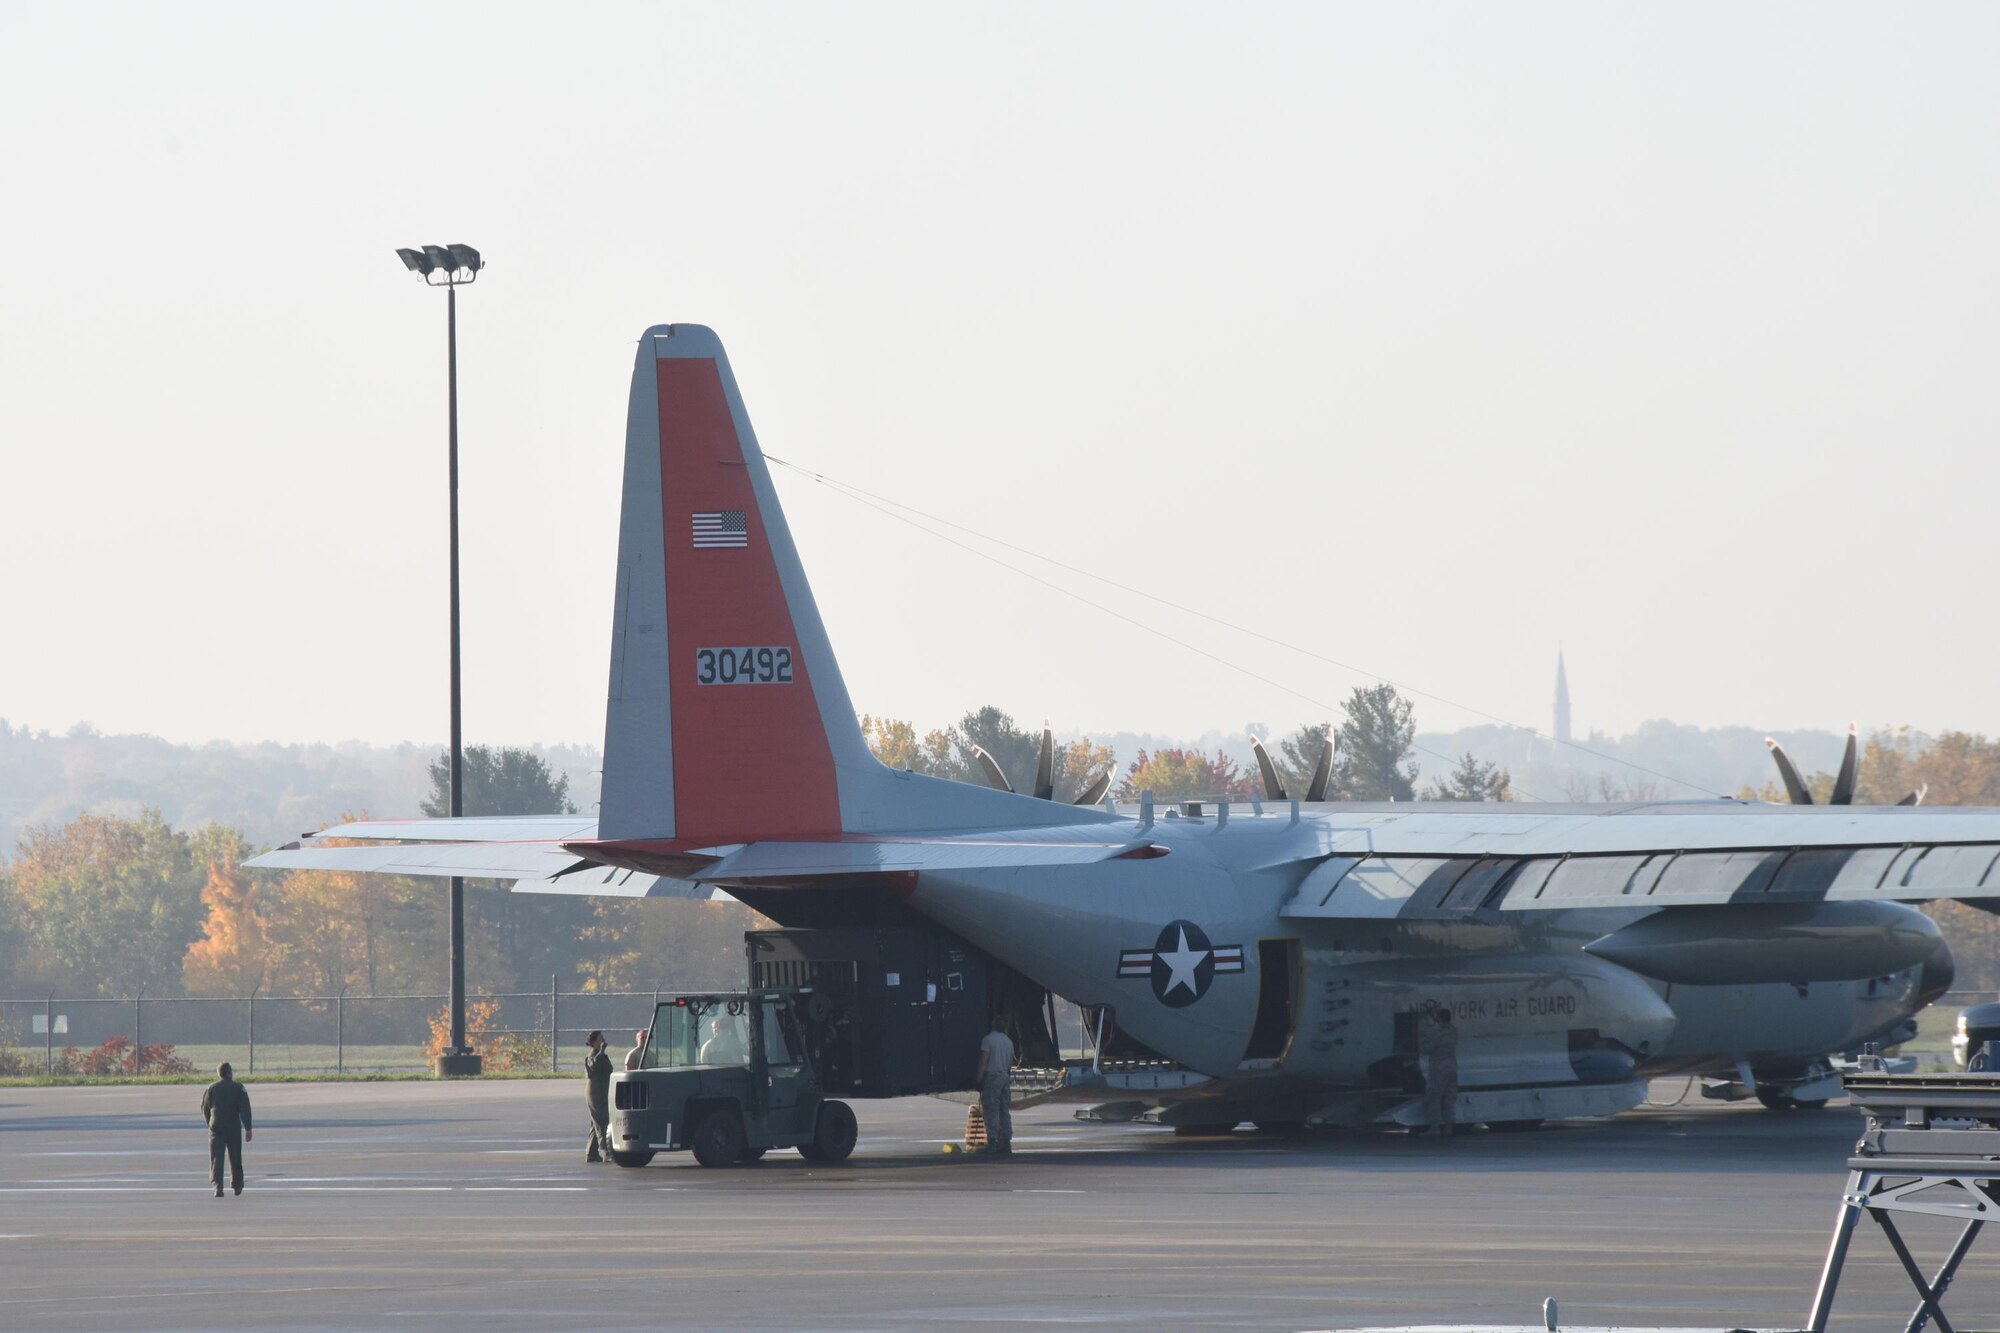 Airmen load cargo onto an LC-130 "Skibird" with the New York Air National Guard's 109th Airlift Wing on Oct. 18, 2016, shortly before it departed for McMurdo Station, Antarctica. This is the 29th season that the unit will participate in Operation Deep Freeze, the military component of the U.S. Antarctic Program, which is managed by the National Science Foundation. (U.S. Air National Guard photo by Master Sgt. William Gizara/Released)